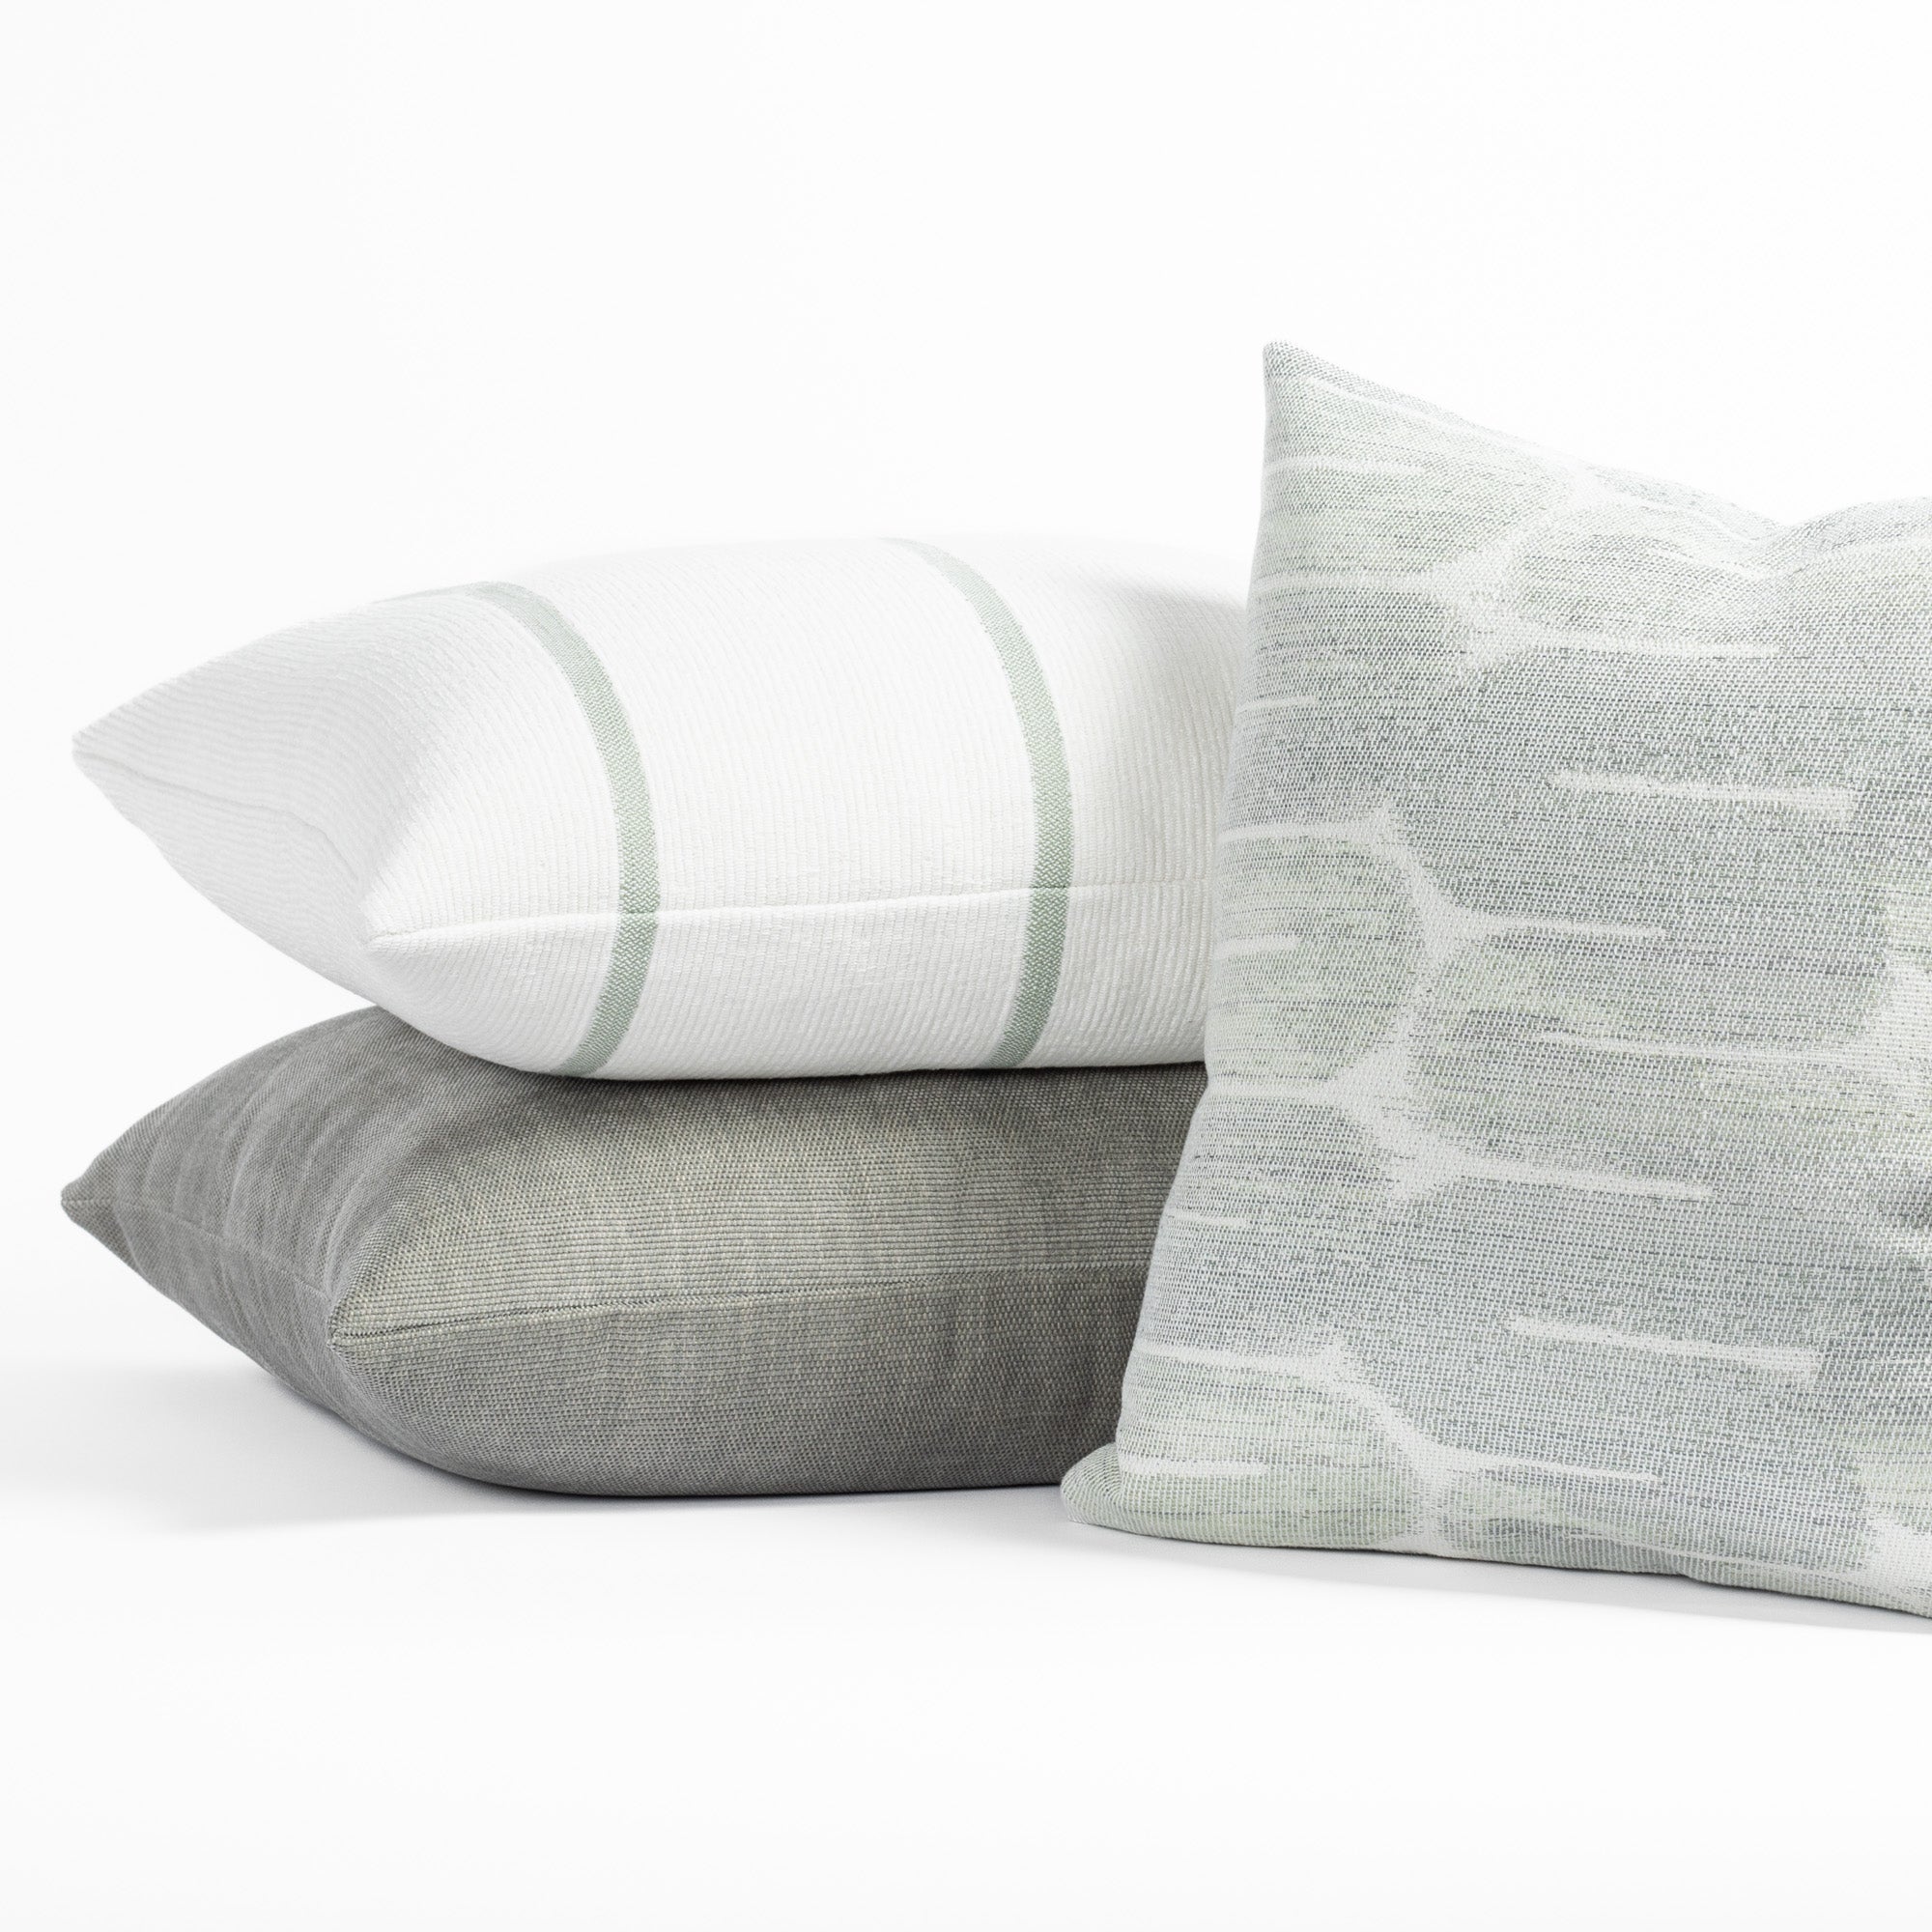 Designer Tonic Living throw pillows in soft green, white and gray colours